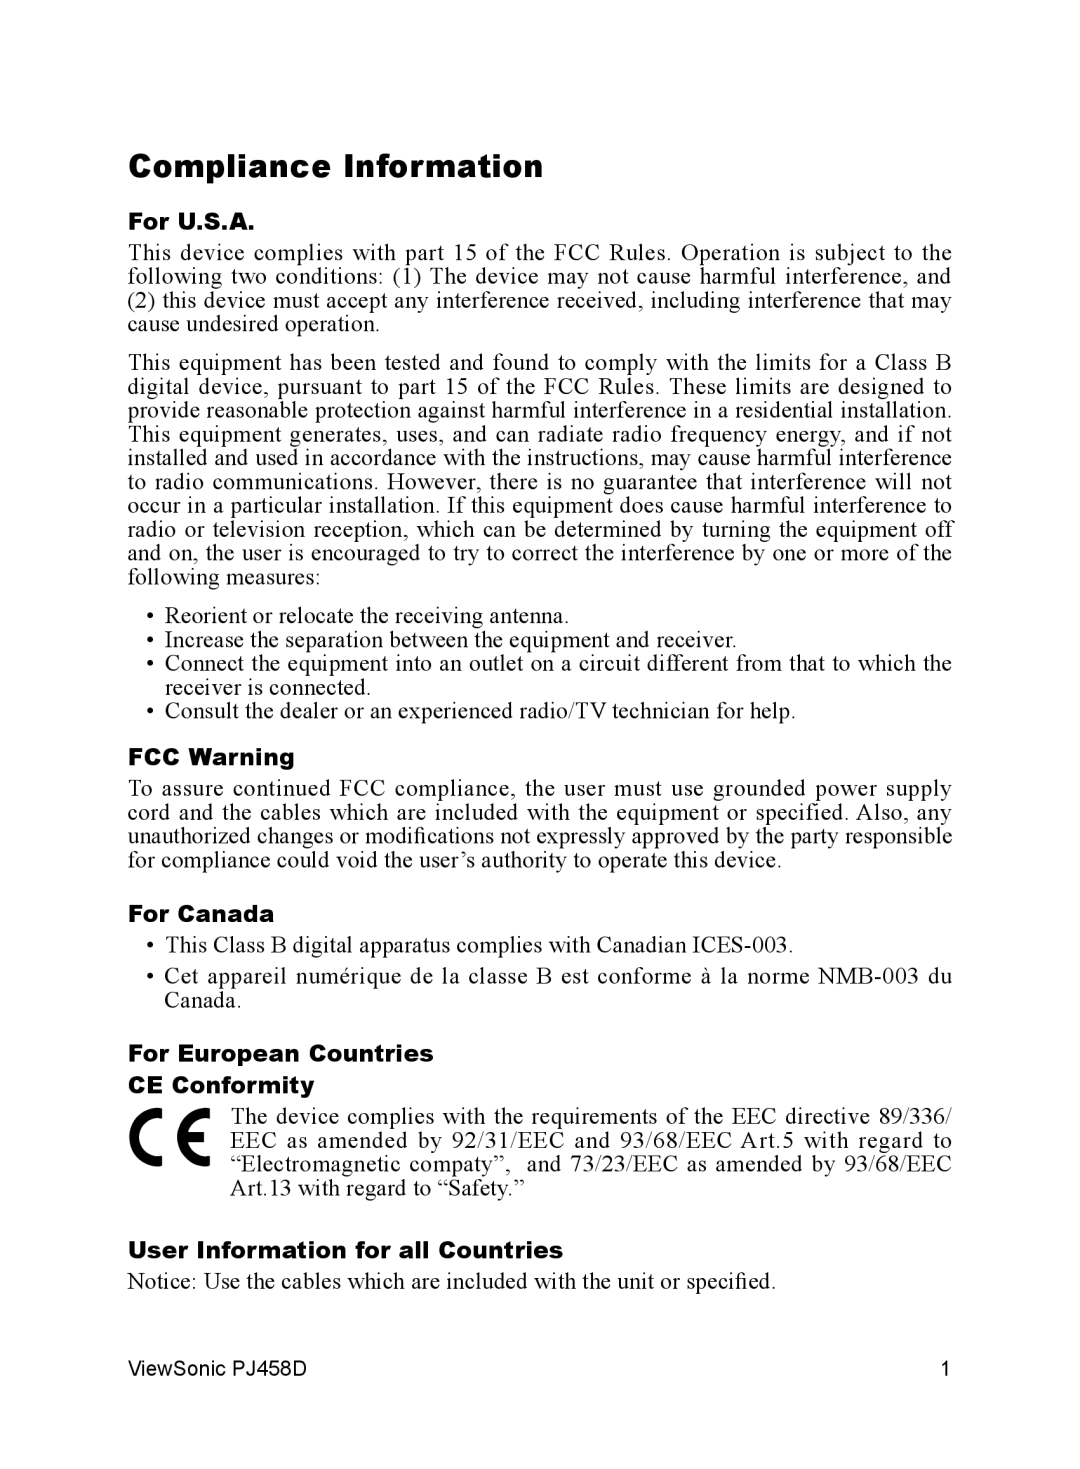 ViewSonic PJ458D manual Compliance Information, For U.S.A, FCC Warning, For Canada, For European Countries CE Conformity 